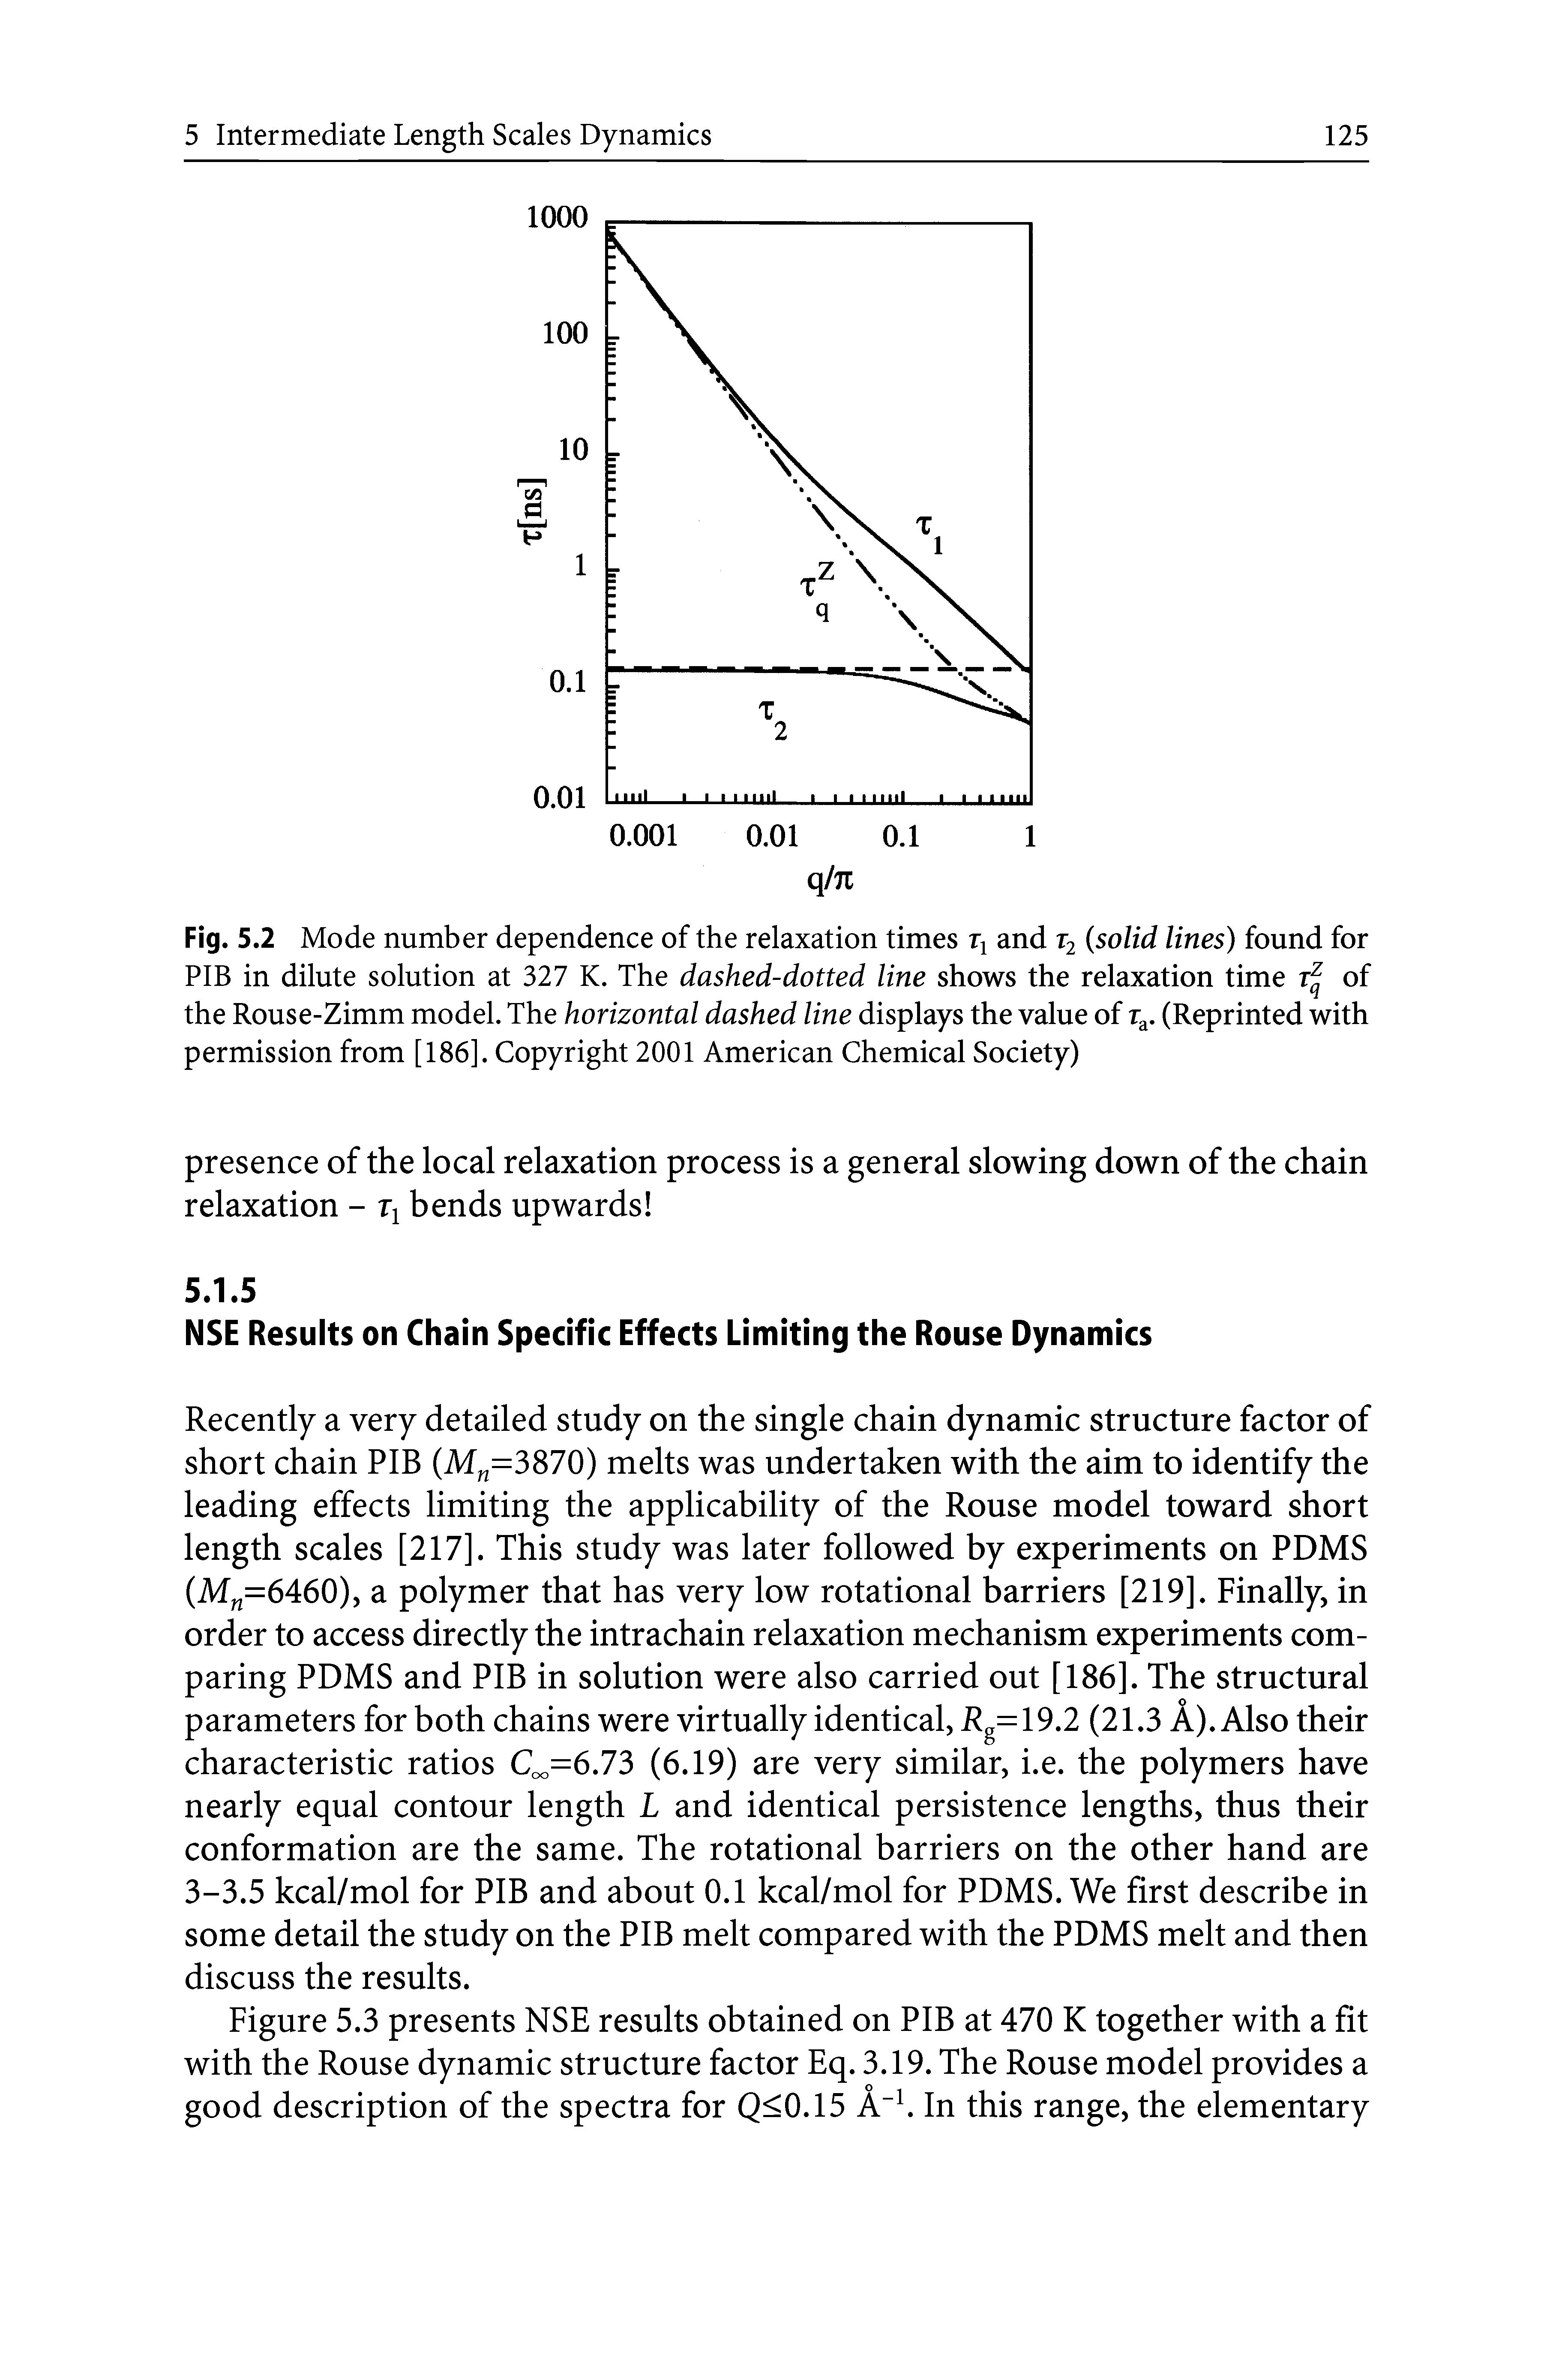 Fig. 5.2 Mode number dependence of the relaxation times and T2 solid lines) found for PIB in dilute solution at 327 K. The dashed-dotted line shows the relaxation time of the Rouse-Zimm model. The horizontal dashed line displays the value of (Reprinted with permission from [186]. Copyright 2001 American Chemical Society)...